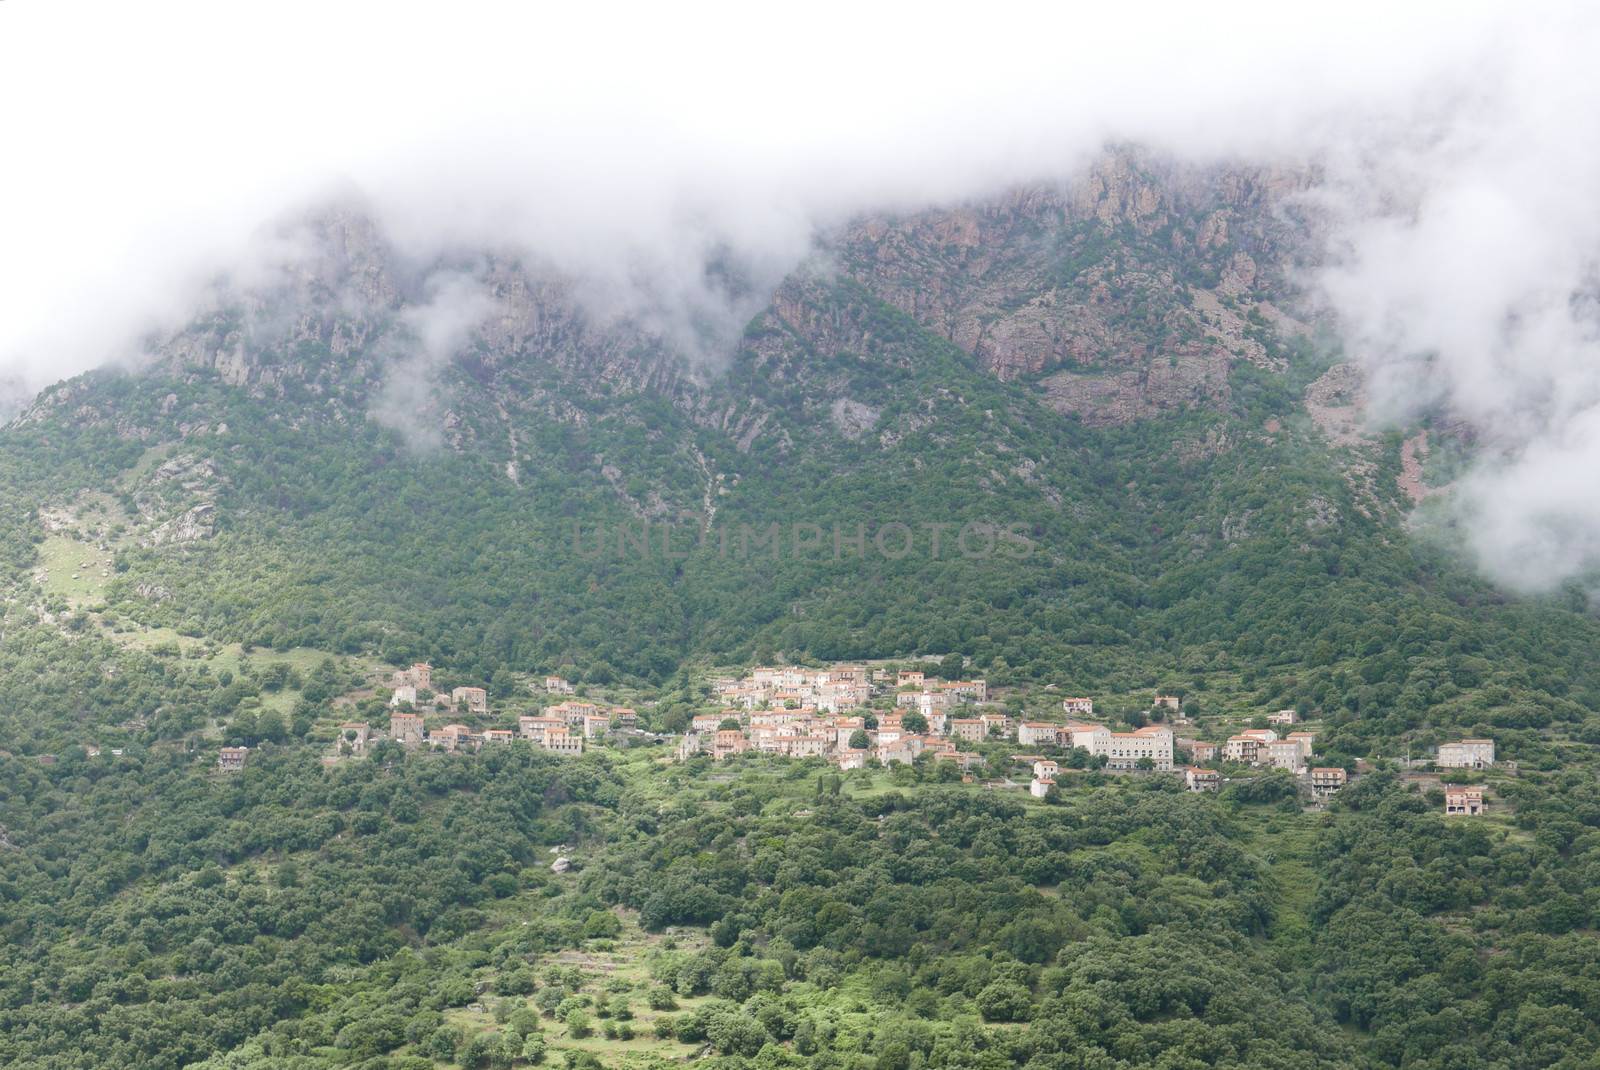 Holidays in southern Corsica.
Discover the mountain landscapes of this beautiful region of France